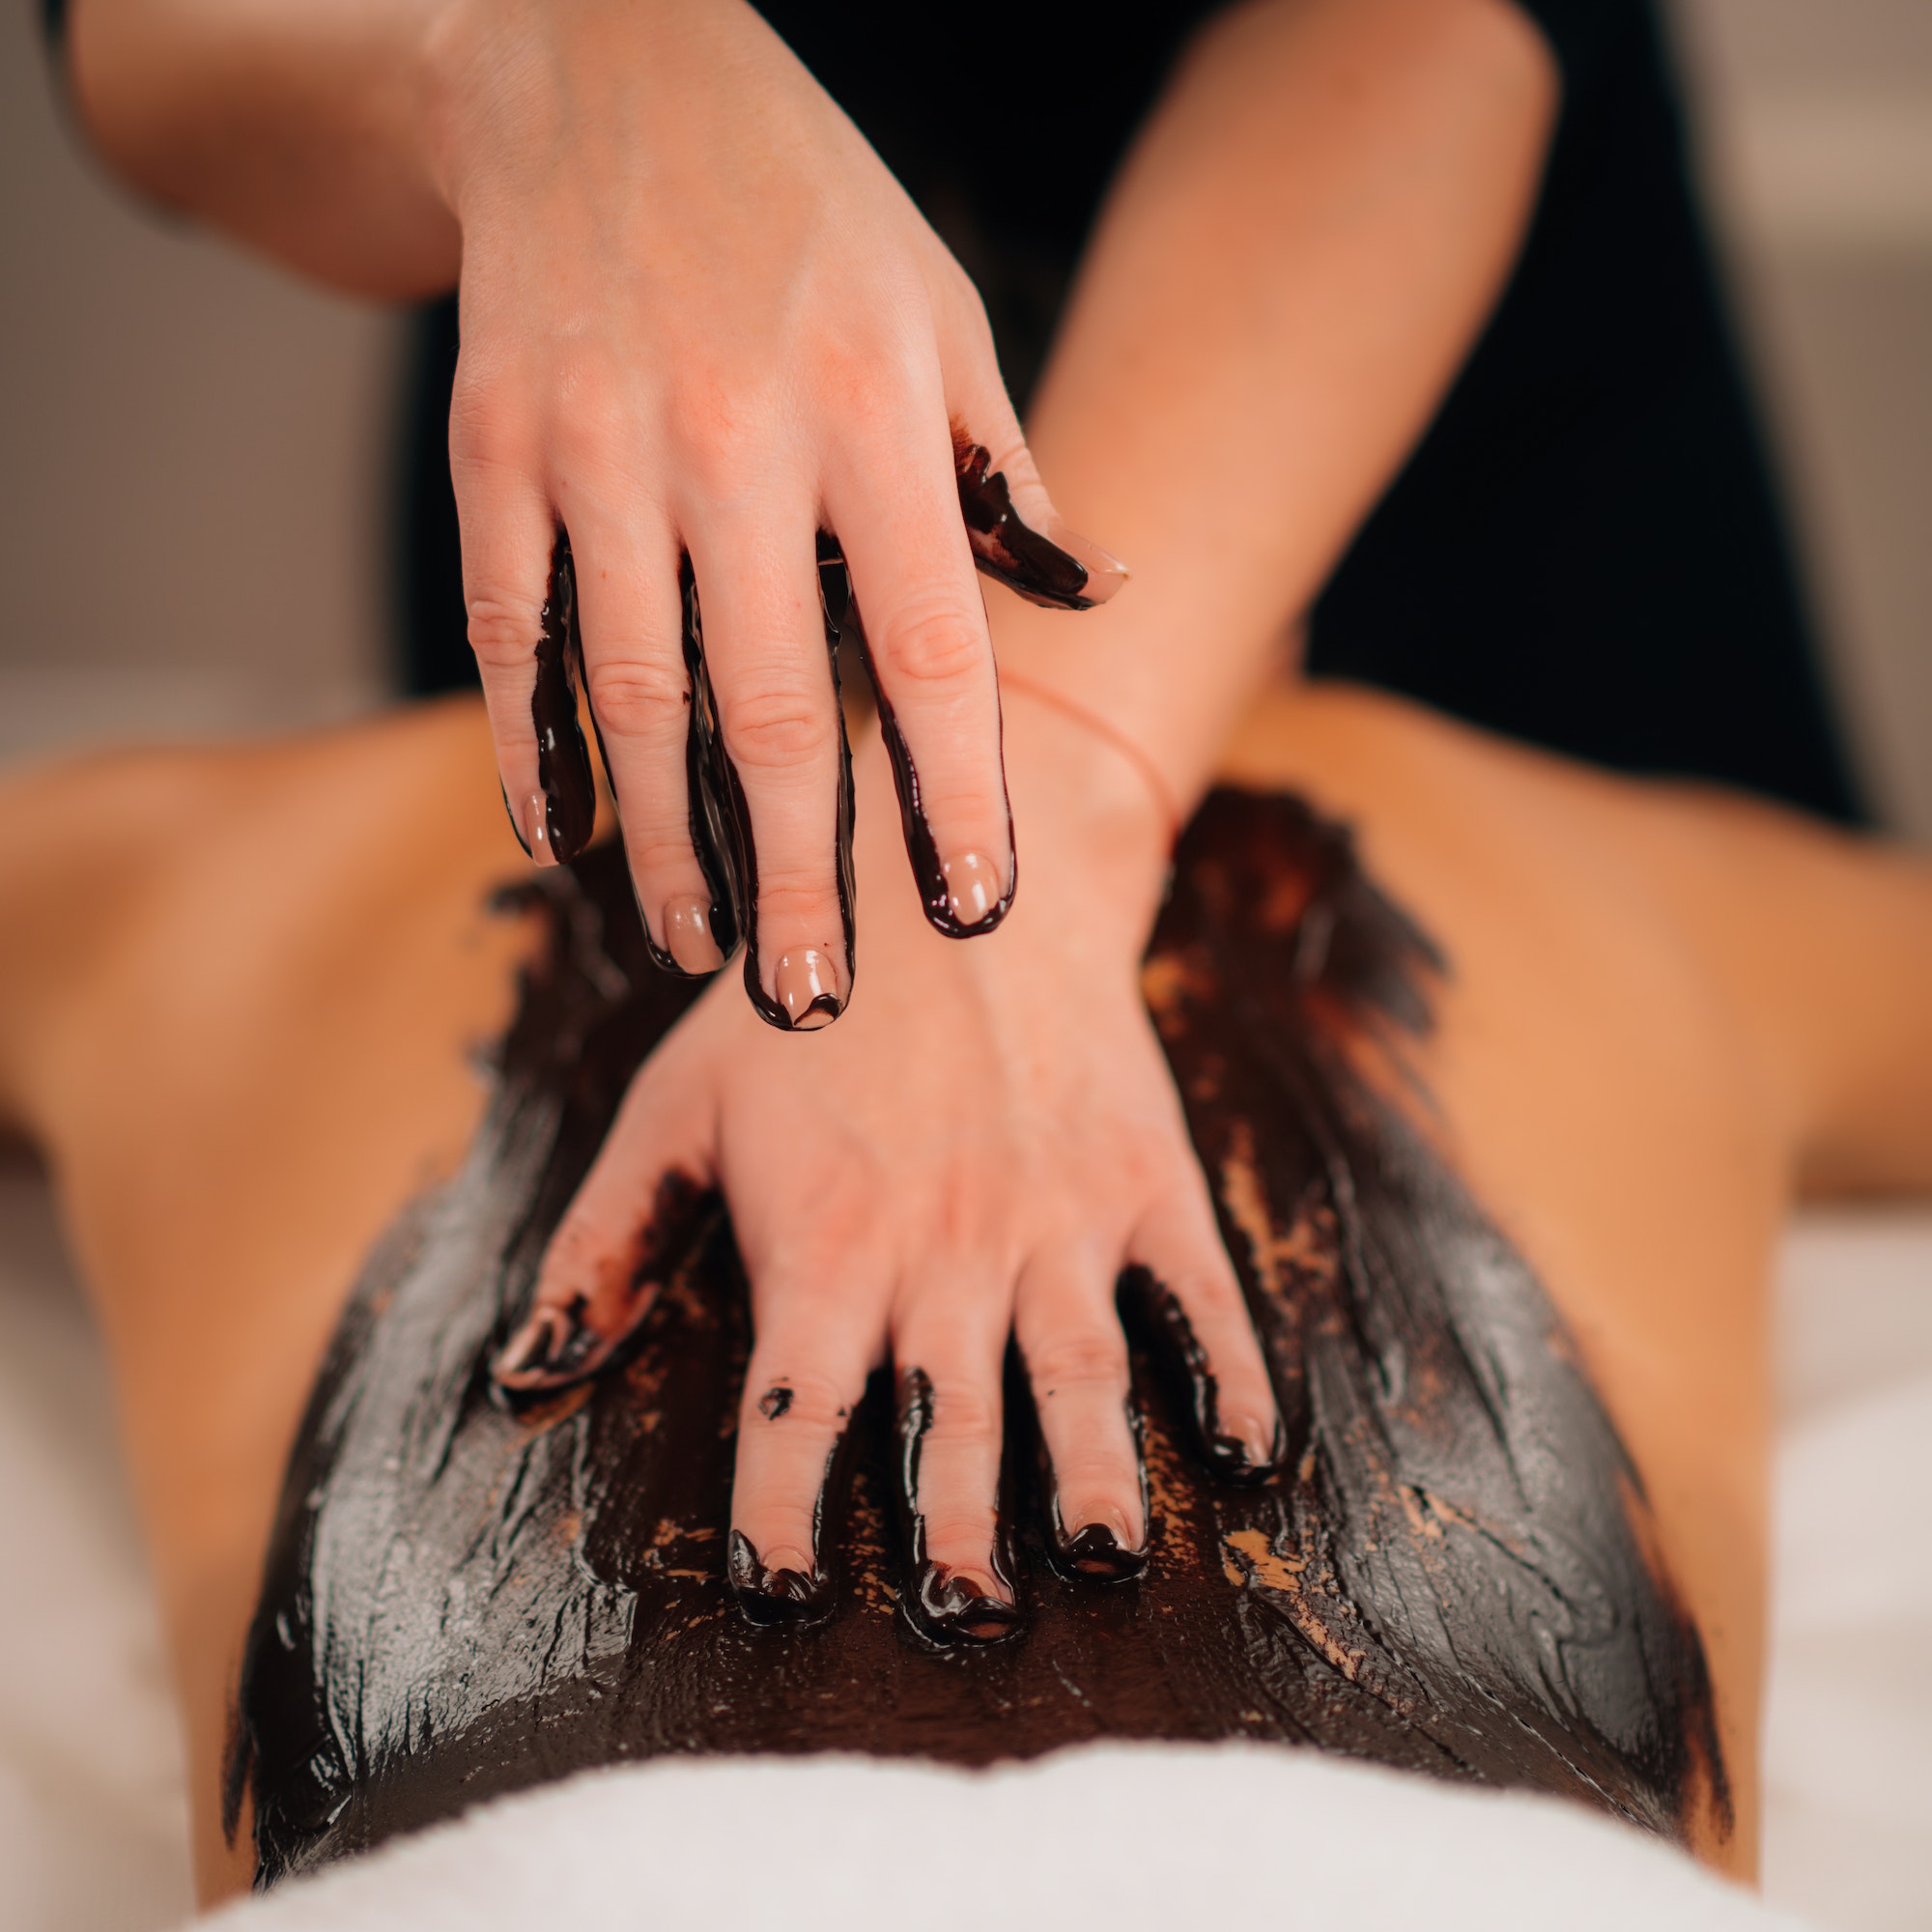 Chocolate Body Massage. Beauty Treatment with rich, cocoa Paste.